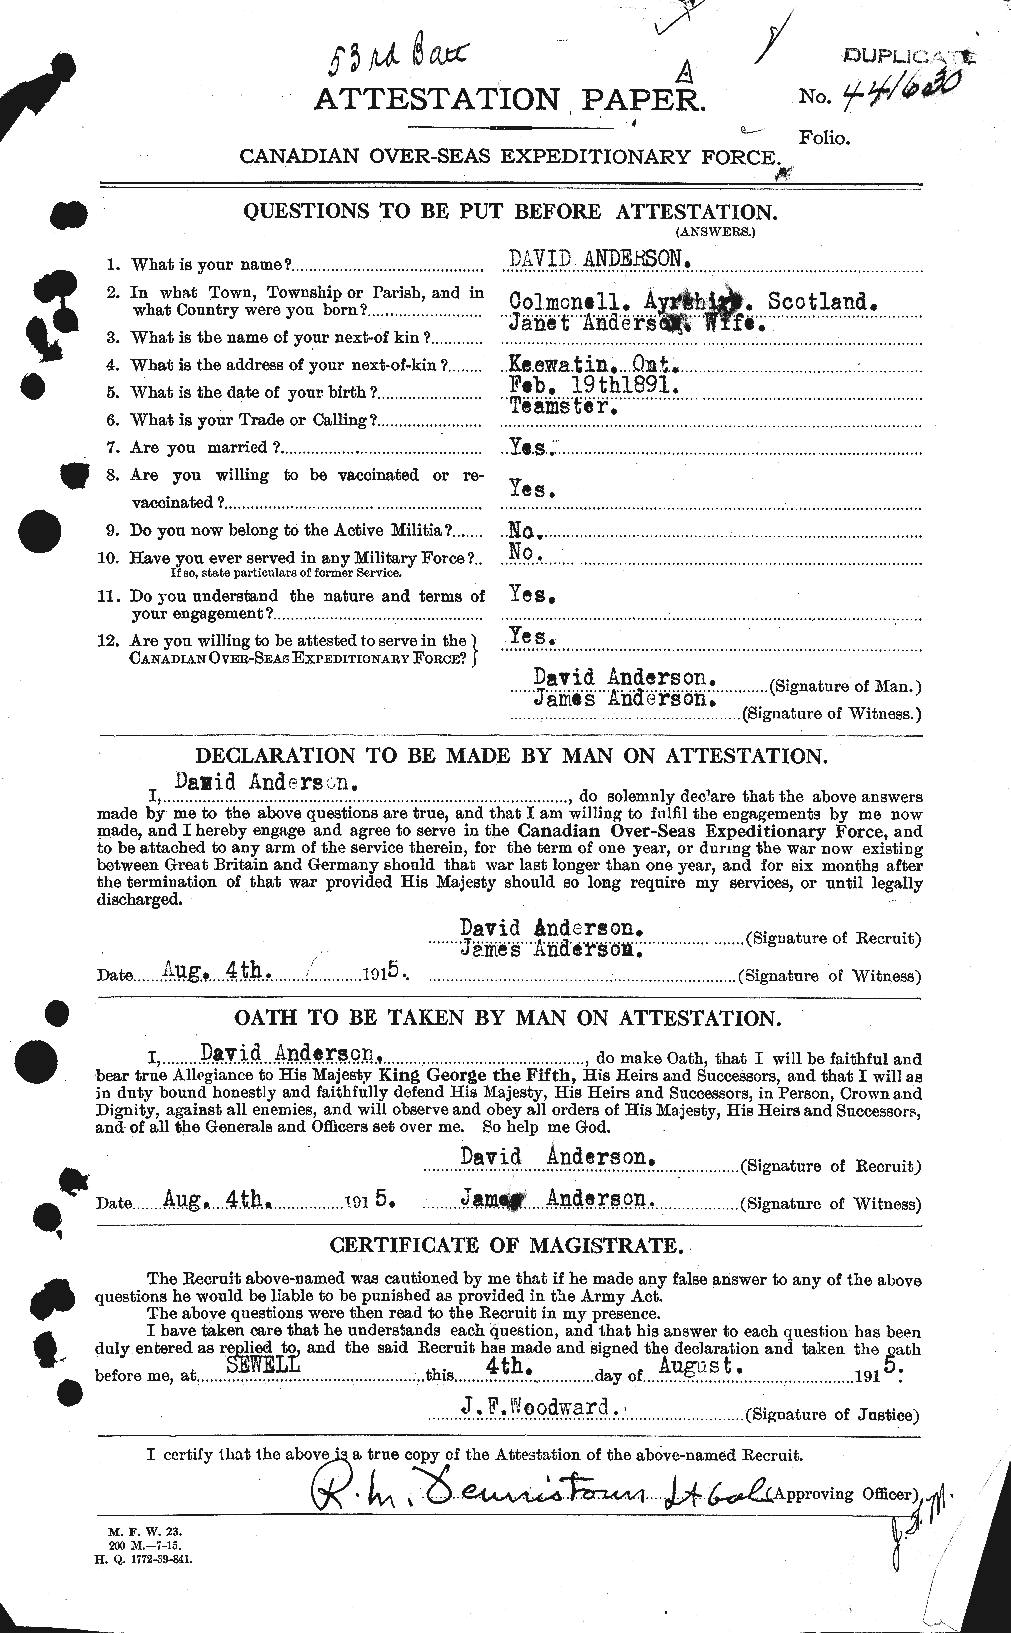 Personnel Records of the First World War - CEF 210032a